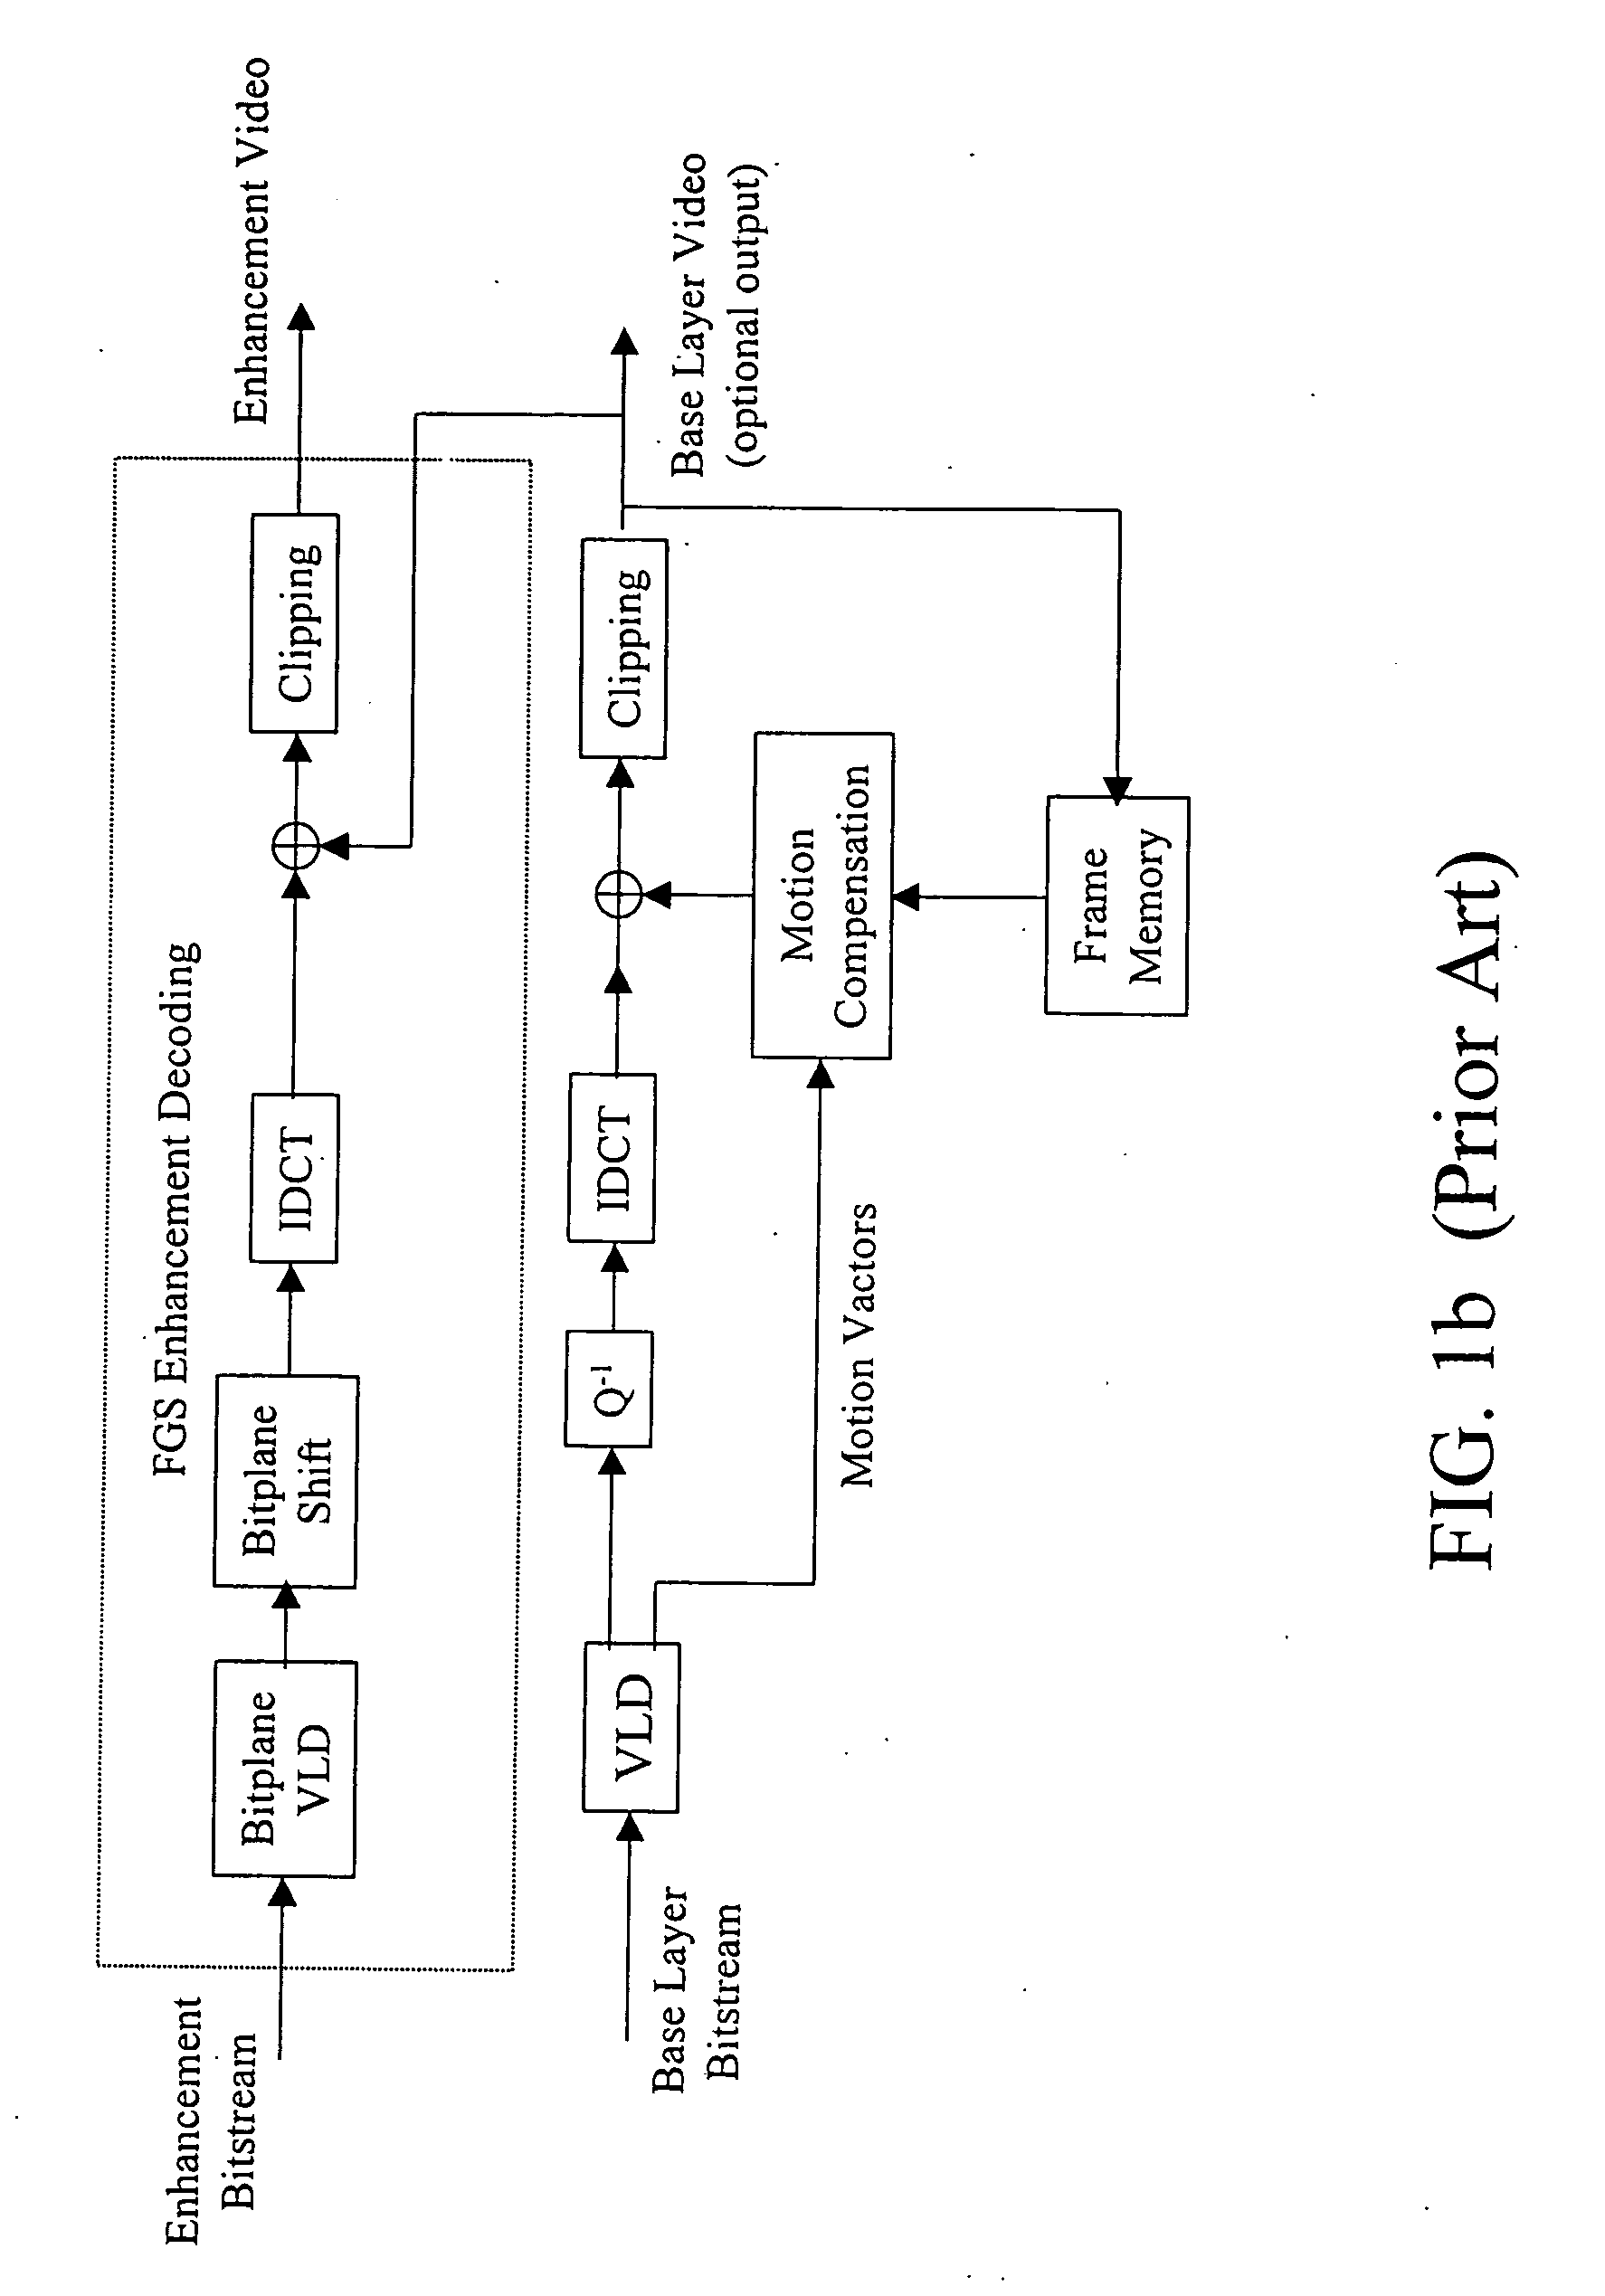 Architecture and method for fine granularity scalable video coding